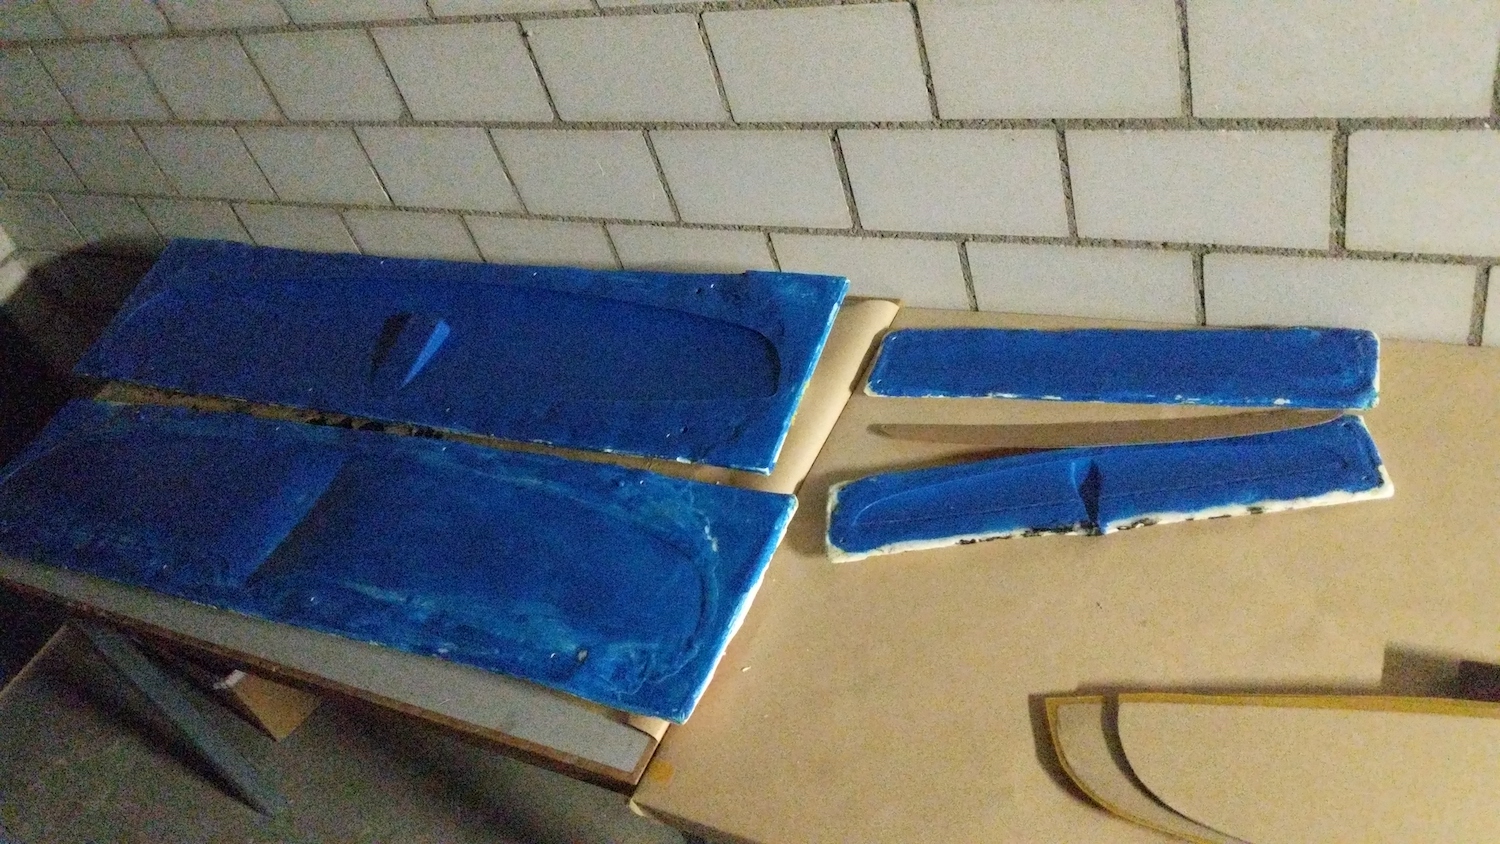 Molds for Axis 1150 front wing and Axis 460 back wing